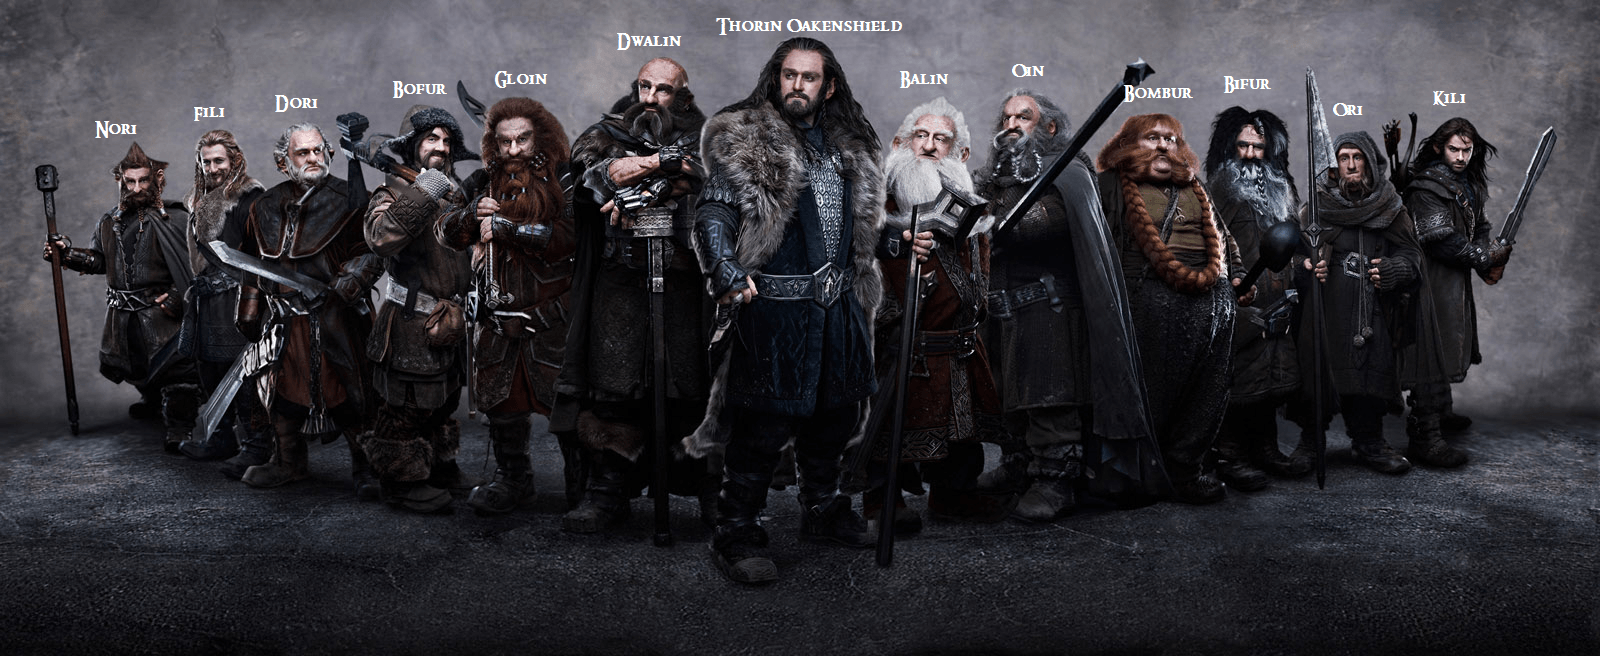 Thorin and Company. The One Wiki to Rule Them All